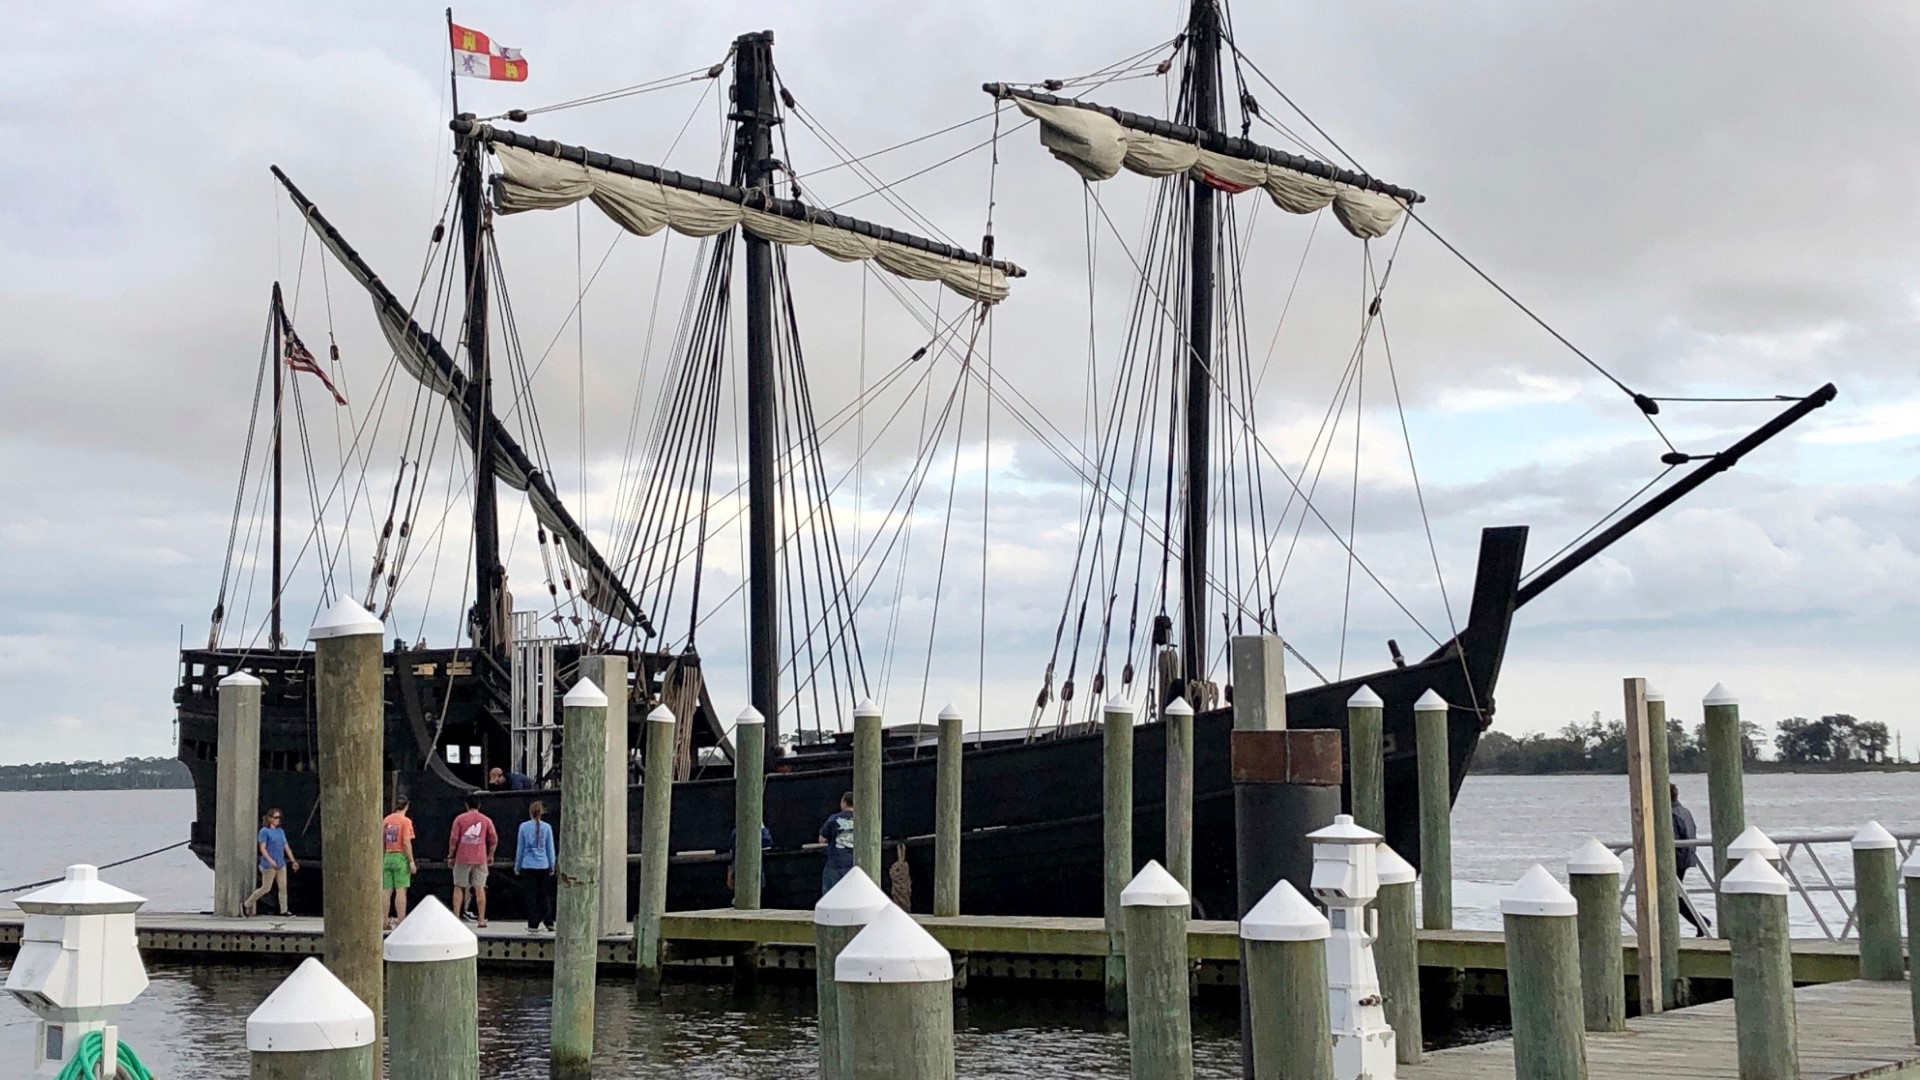 Replicas of Christopher Columbus' Niña and Pinta ships have arrived at a harbor on Mississippi's Gulf Coast.